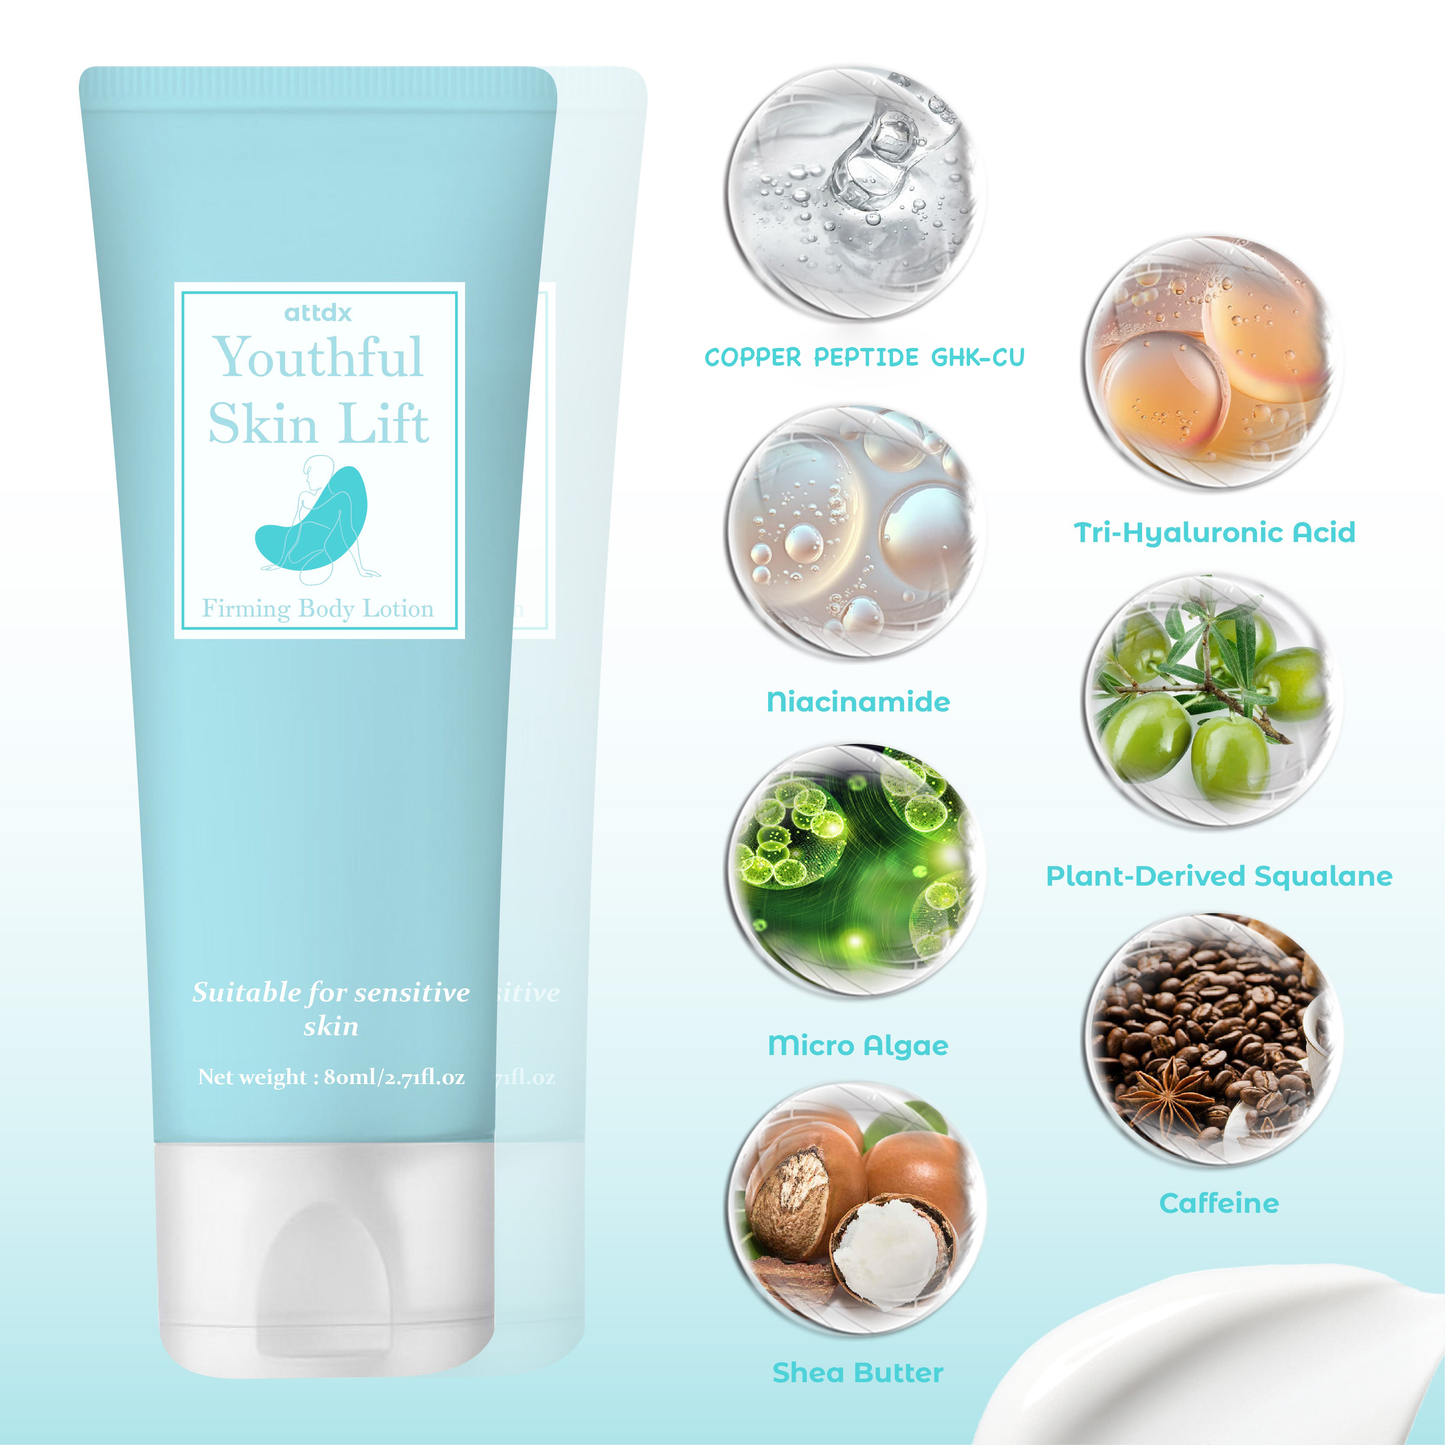 SkinLift Youthful Firming Body Lotion